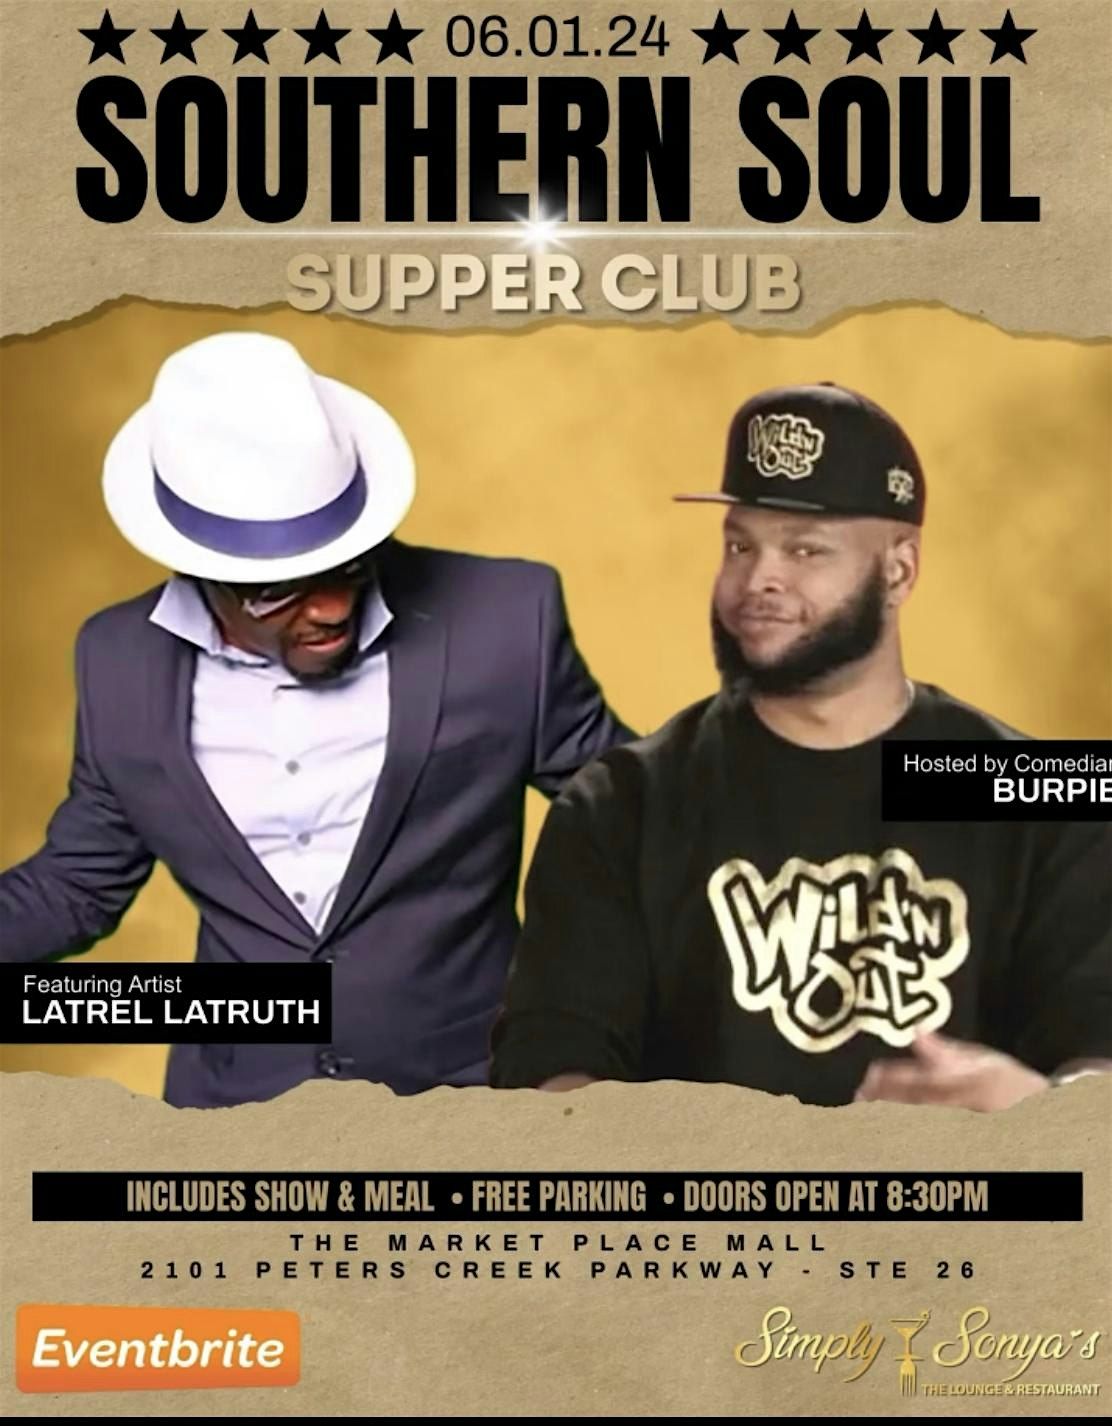 The Southern Soul & Comedy Supper Club